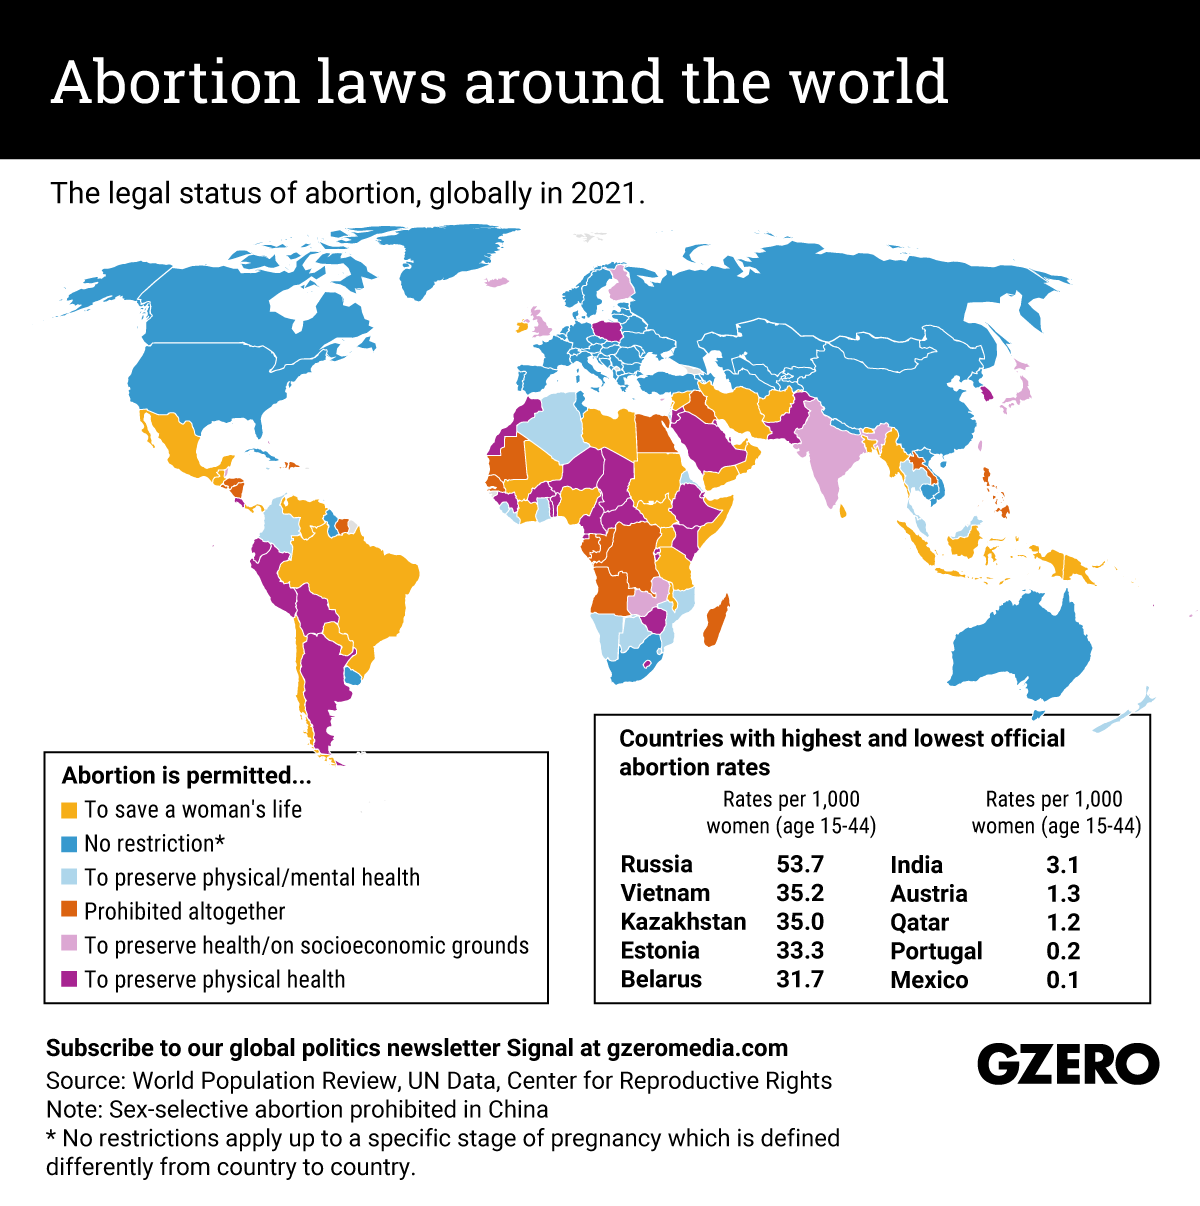 The legal status of abortion, globally in 2021.